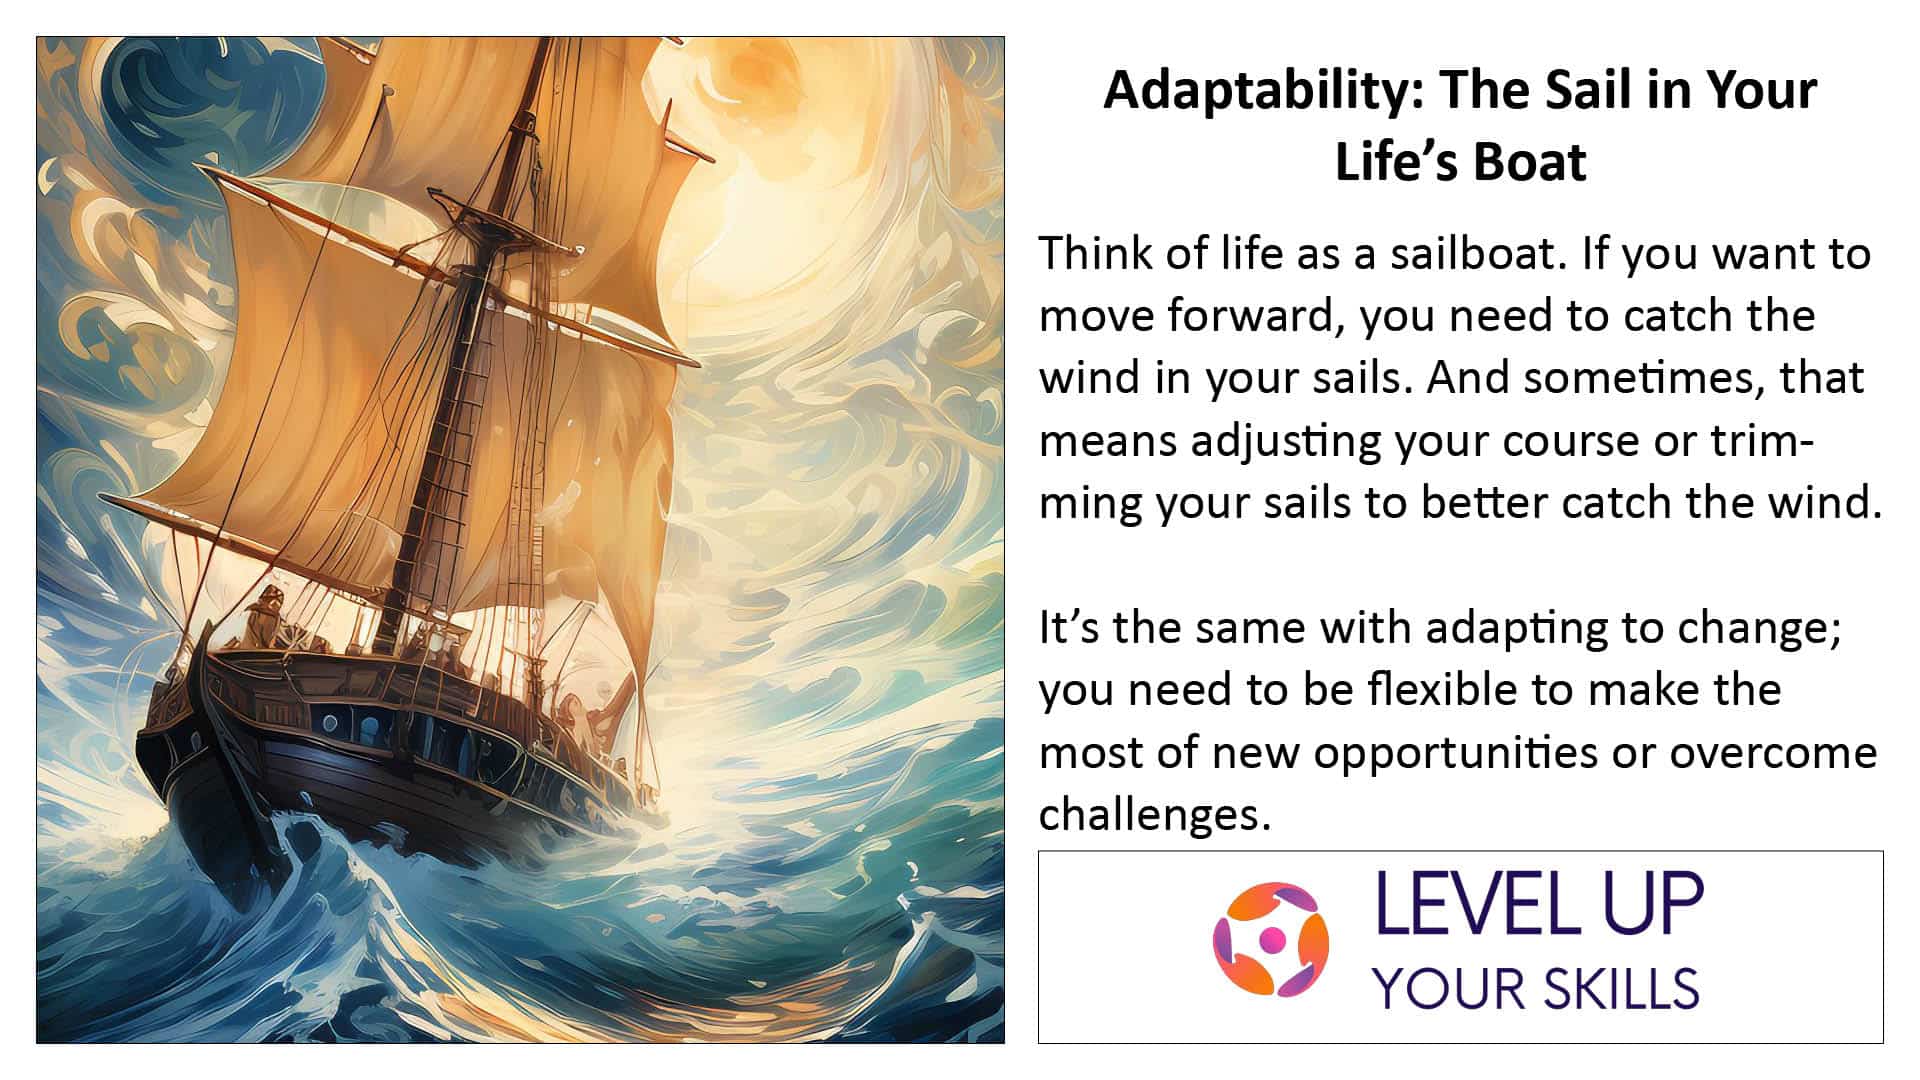 Adaptability: The Sail In Your Life's Boat